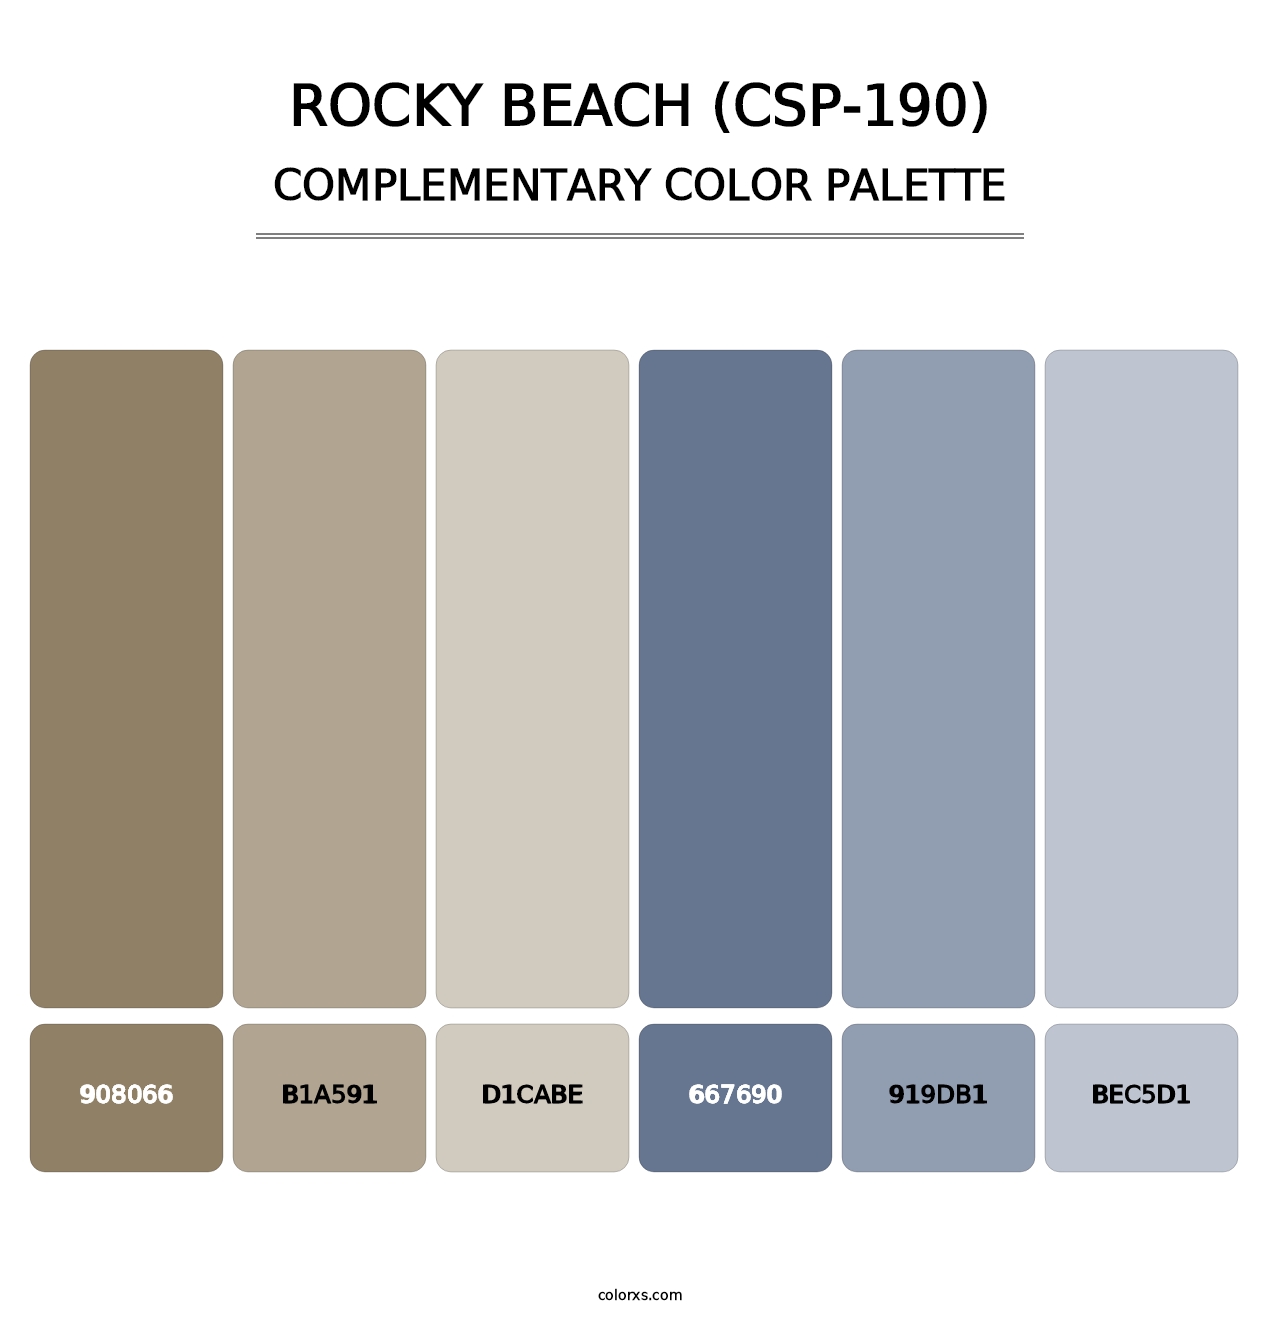 Rocky Beach (CSP-190) - Complementary Color Palette